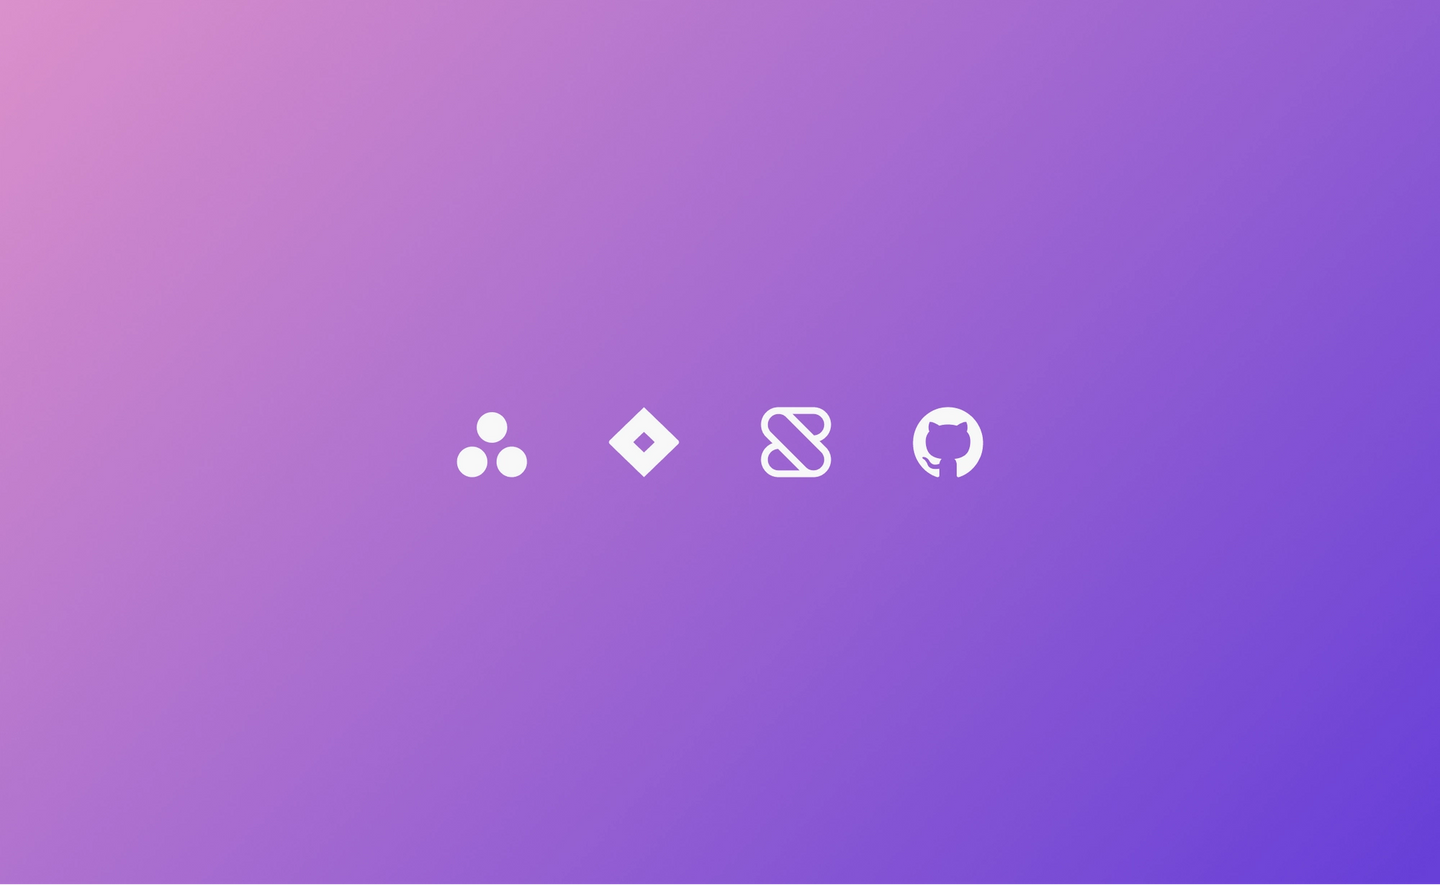 Icons demonstrating services you can import to Linear